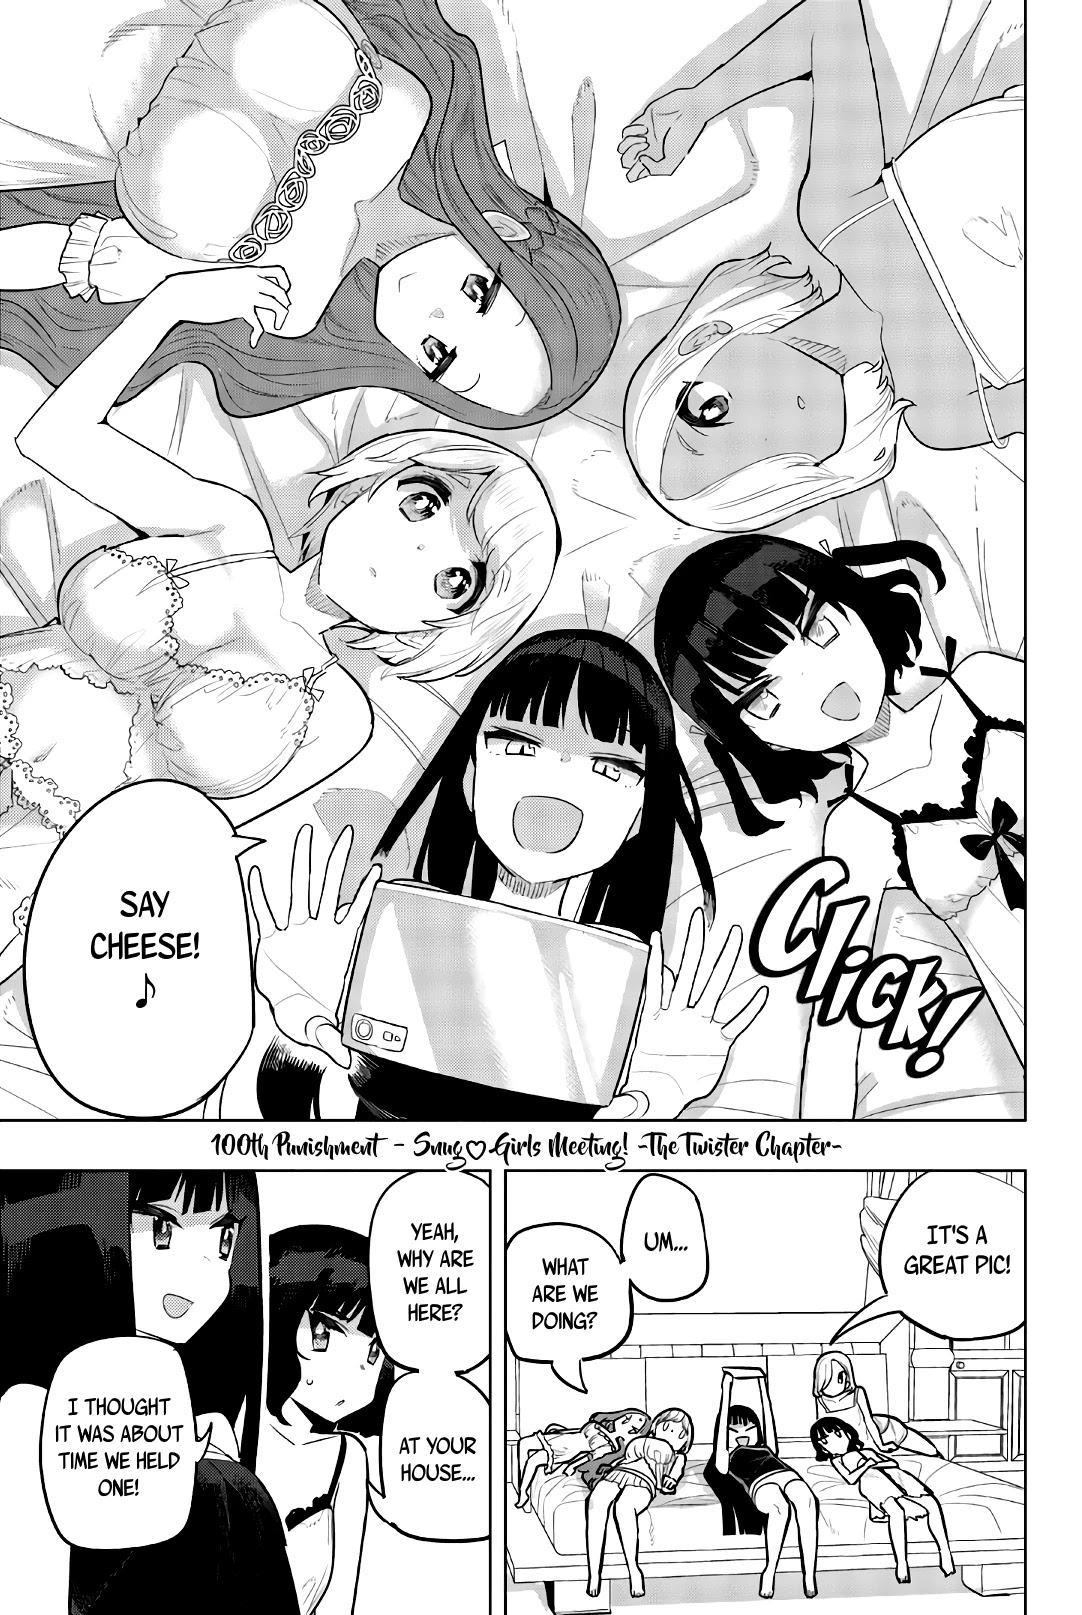 Houkago No Goumon Shoujo Chapter 100: Snug ♥ Girls Meeting! ~The Twister Chapter~ - Picture 1